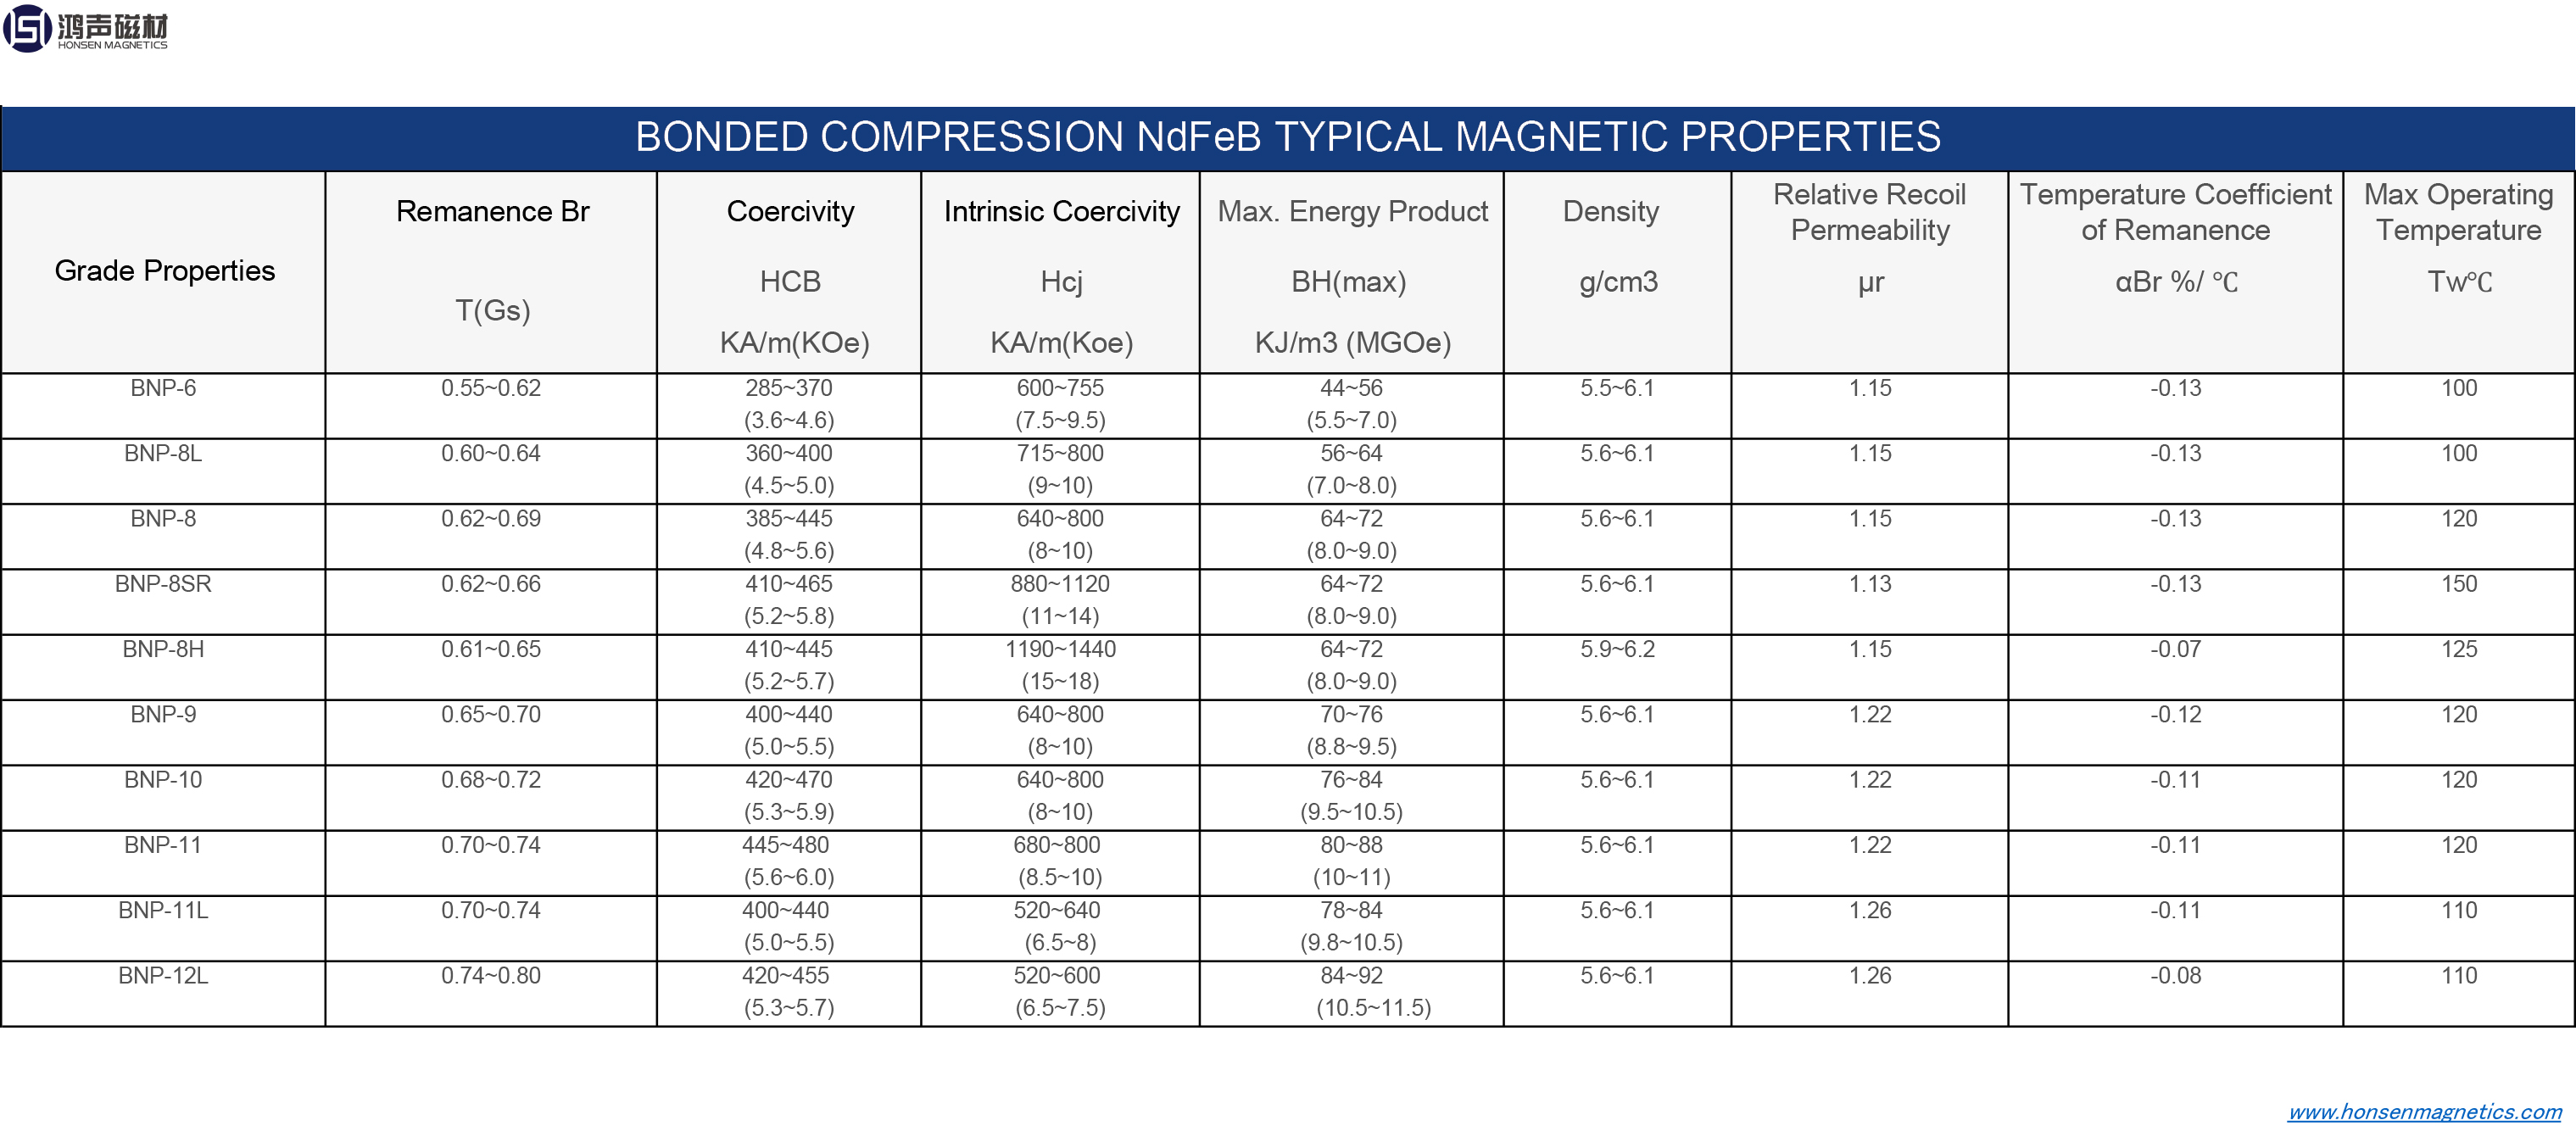 Magnetic Properties sa Bonded Compression NdFeB Magnets